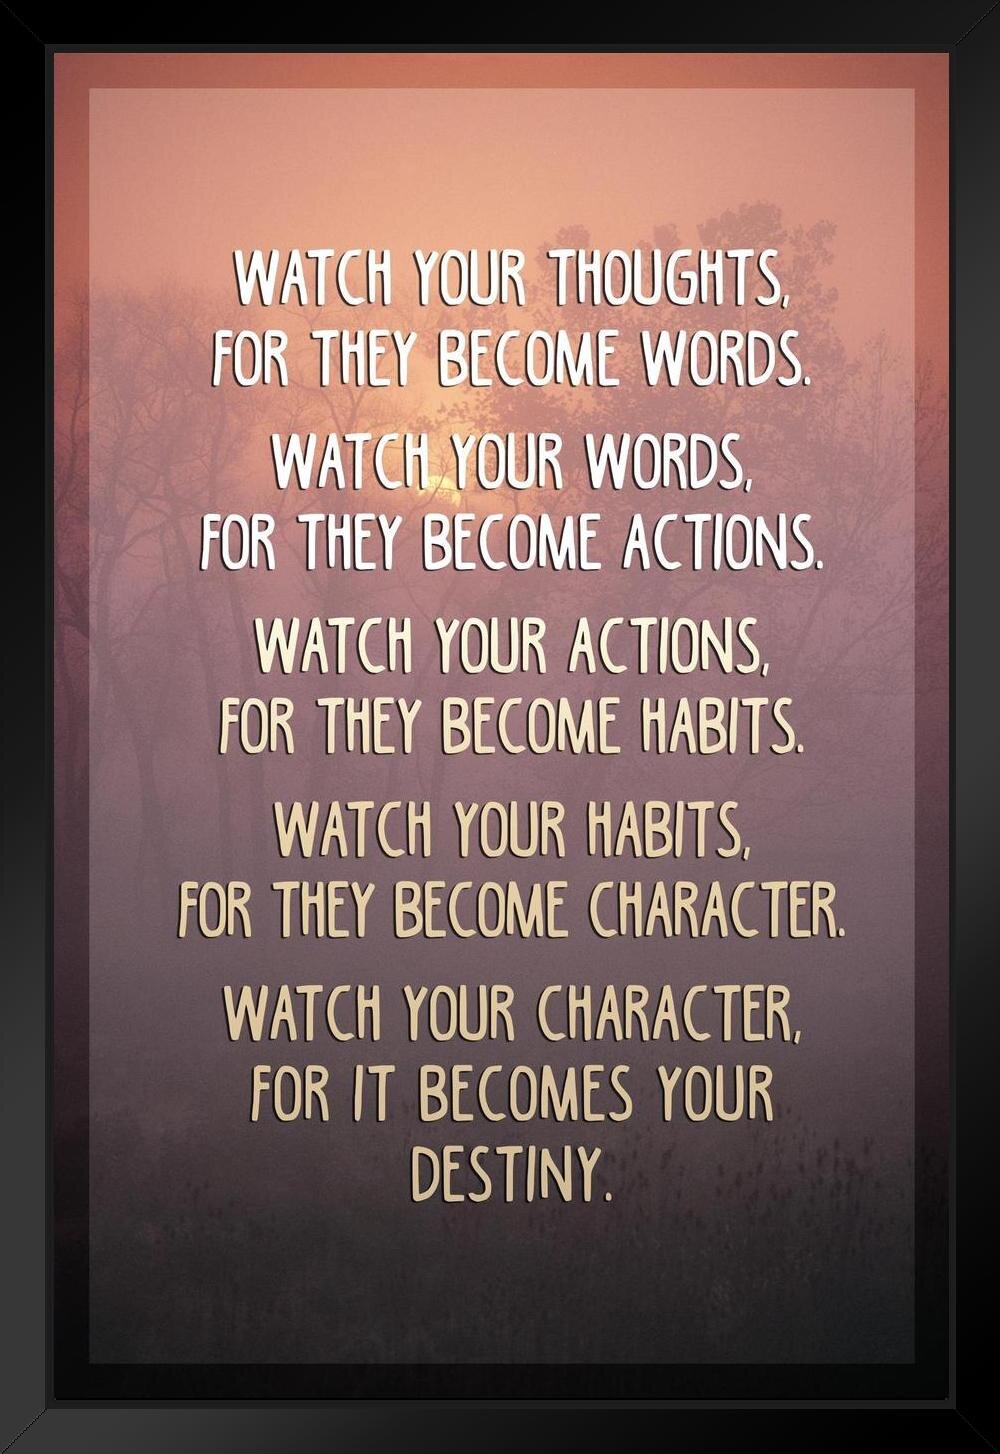 Amazon.com: Lao Tzu - Floating Quote - Watch your thoughts they become your  words actions habits character destiny - Art Print Thinking Self  Improvement (White Frame, 11x14 inches) : Handmade Products